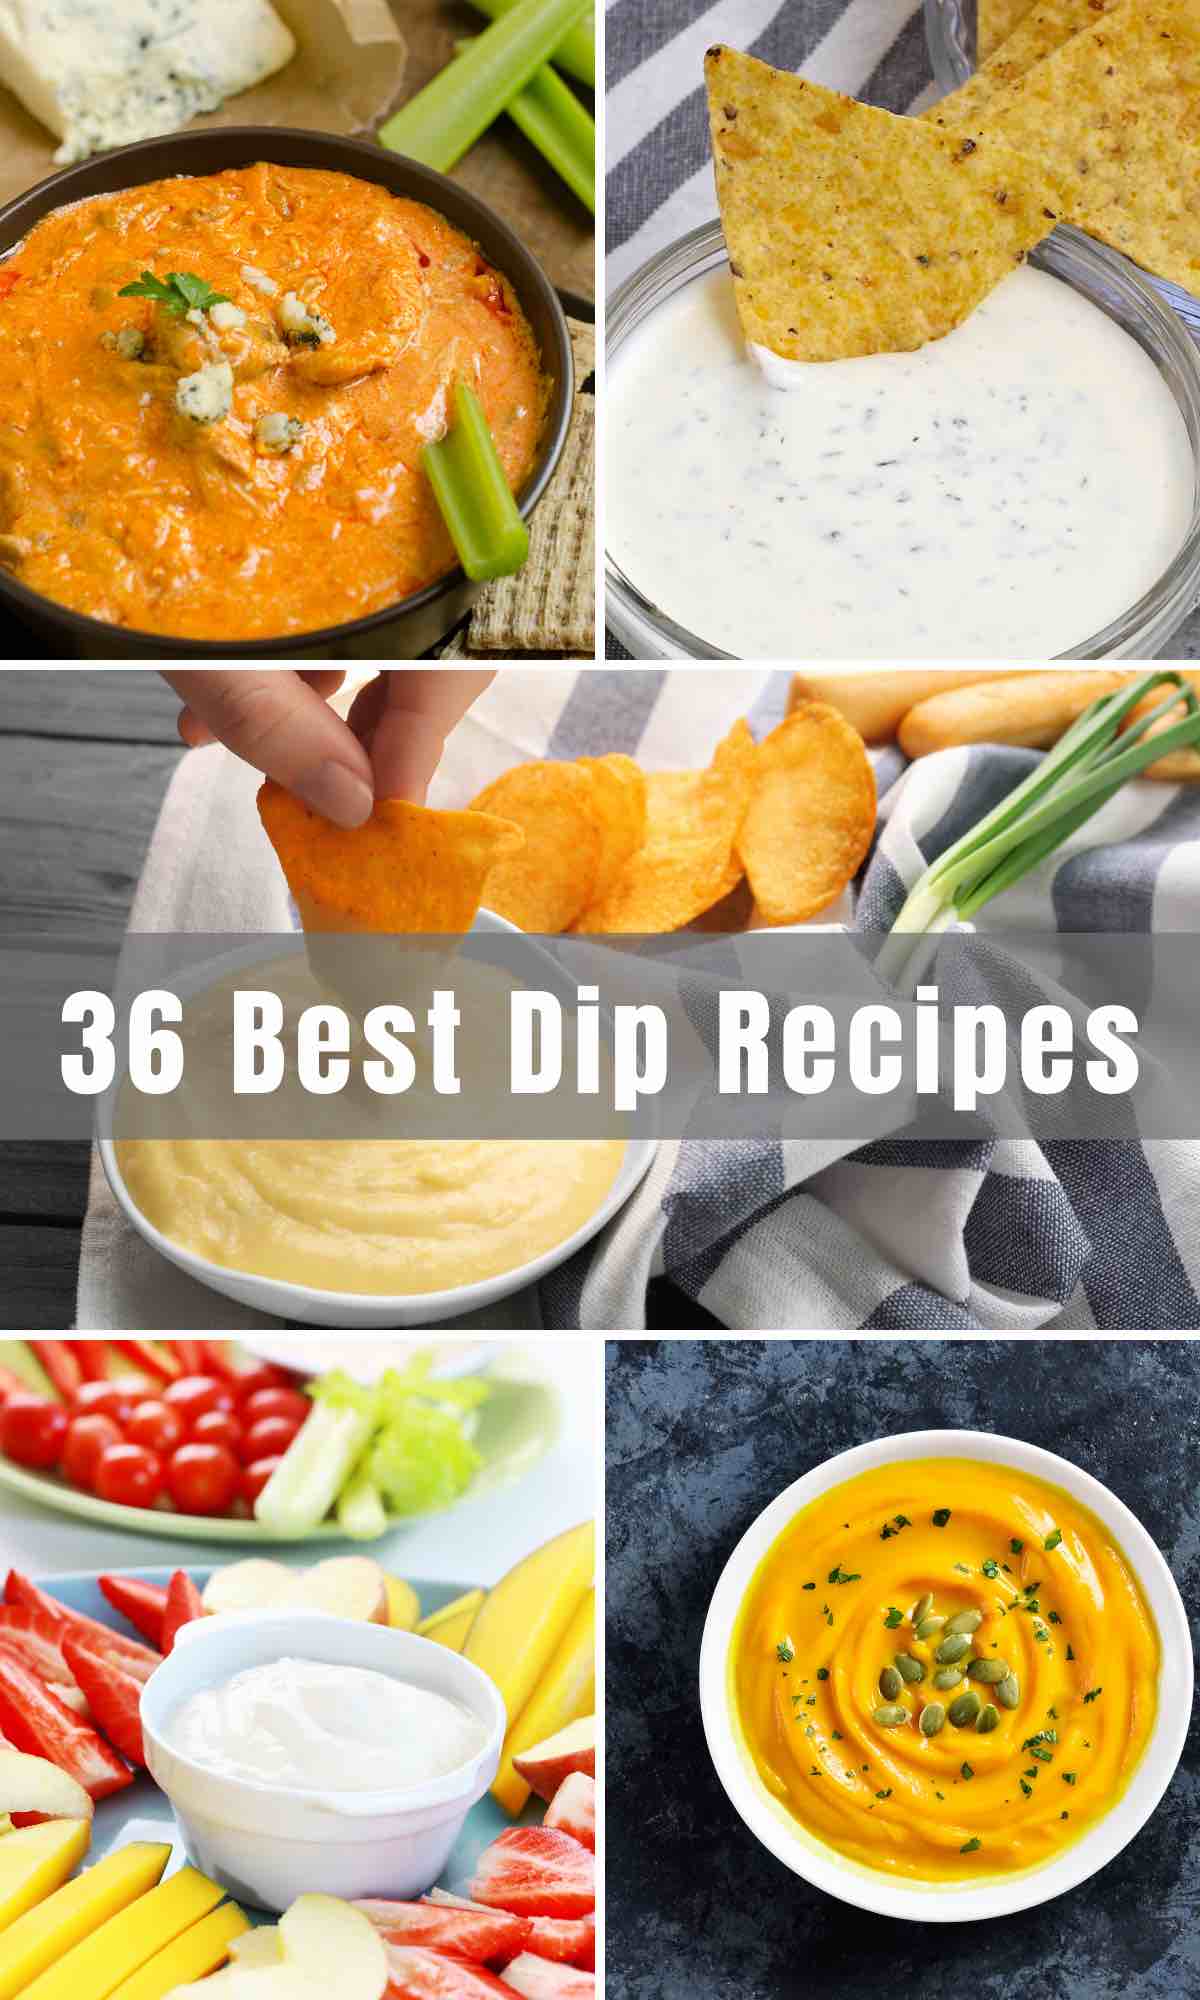 Looking for a quick and delicious dip for a potluck, party, or holiday gathering? We've rounded up 36 of the Best Dip recipes for you to win over any crowd! From Buffalo chicken dip to crab dip and spinach dip, you are sure to find something for your next party!